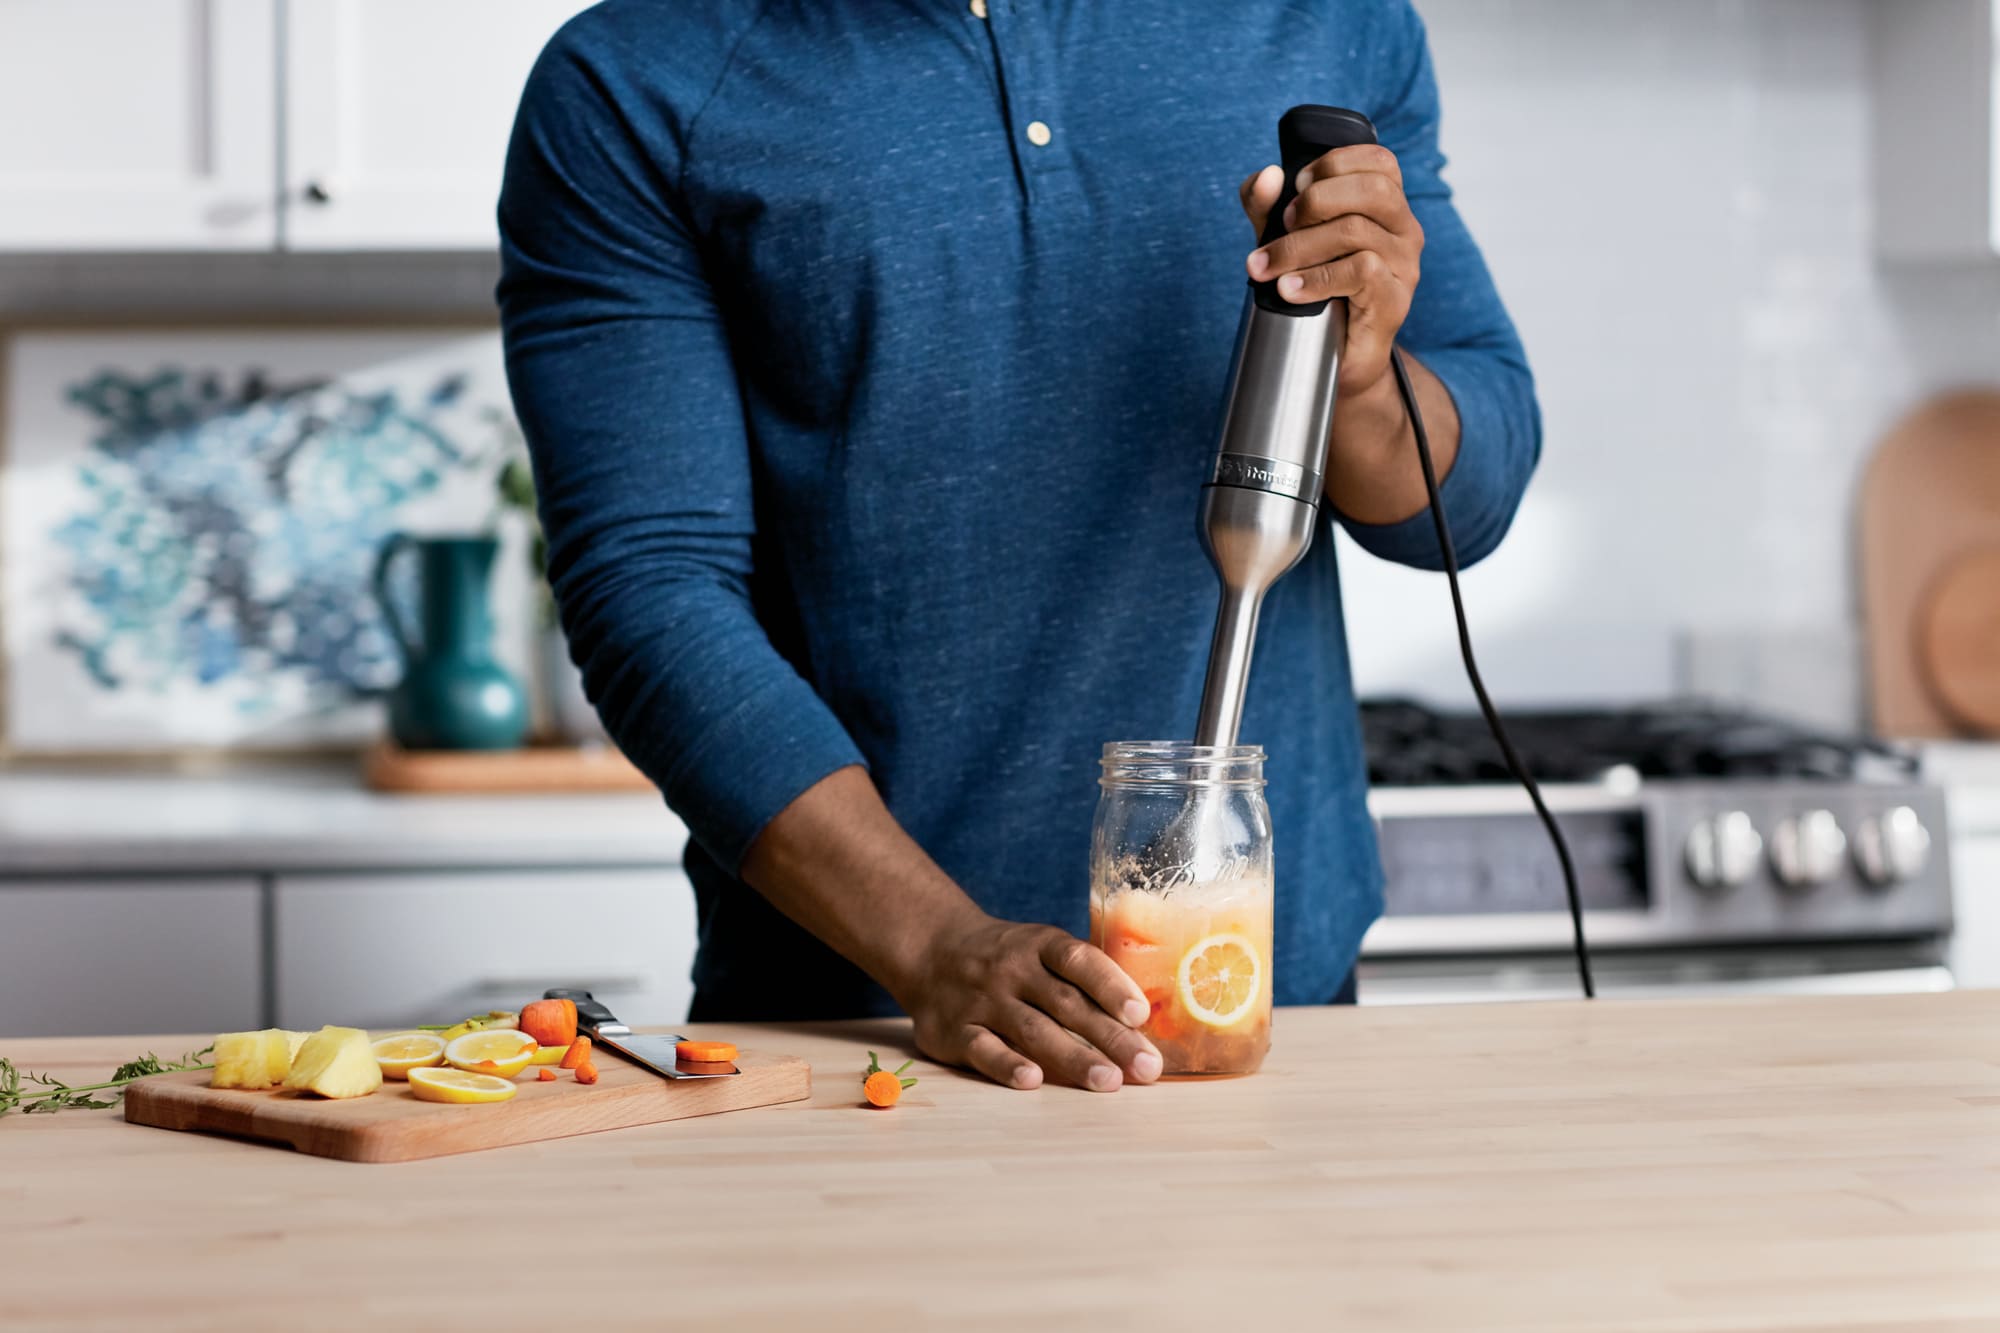 image of the Vitamix Immersion blender in action, on sale periodically throughout the year.